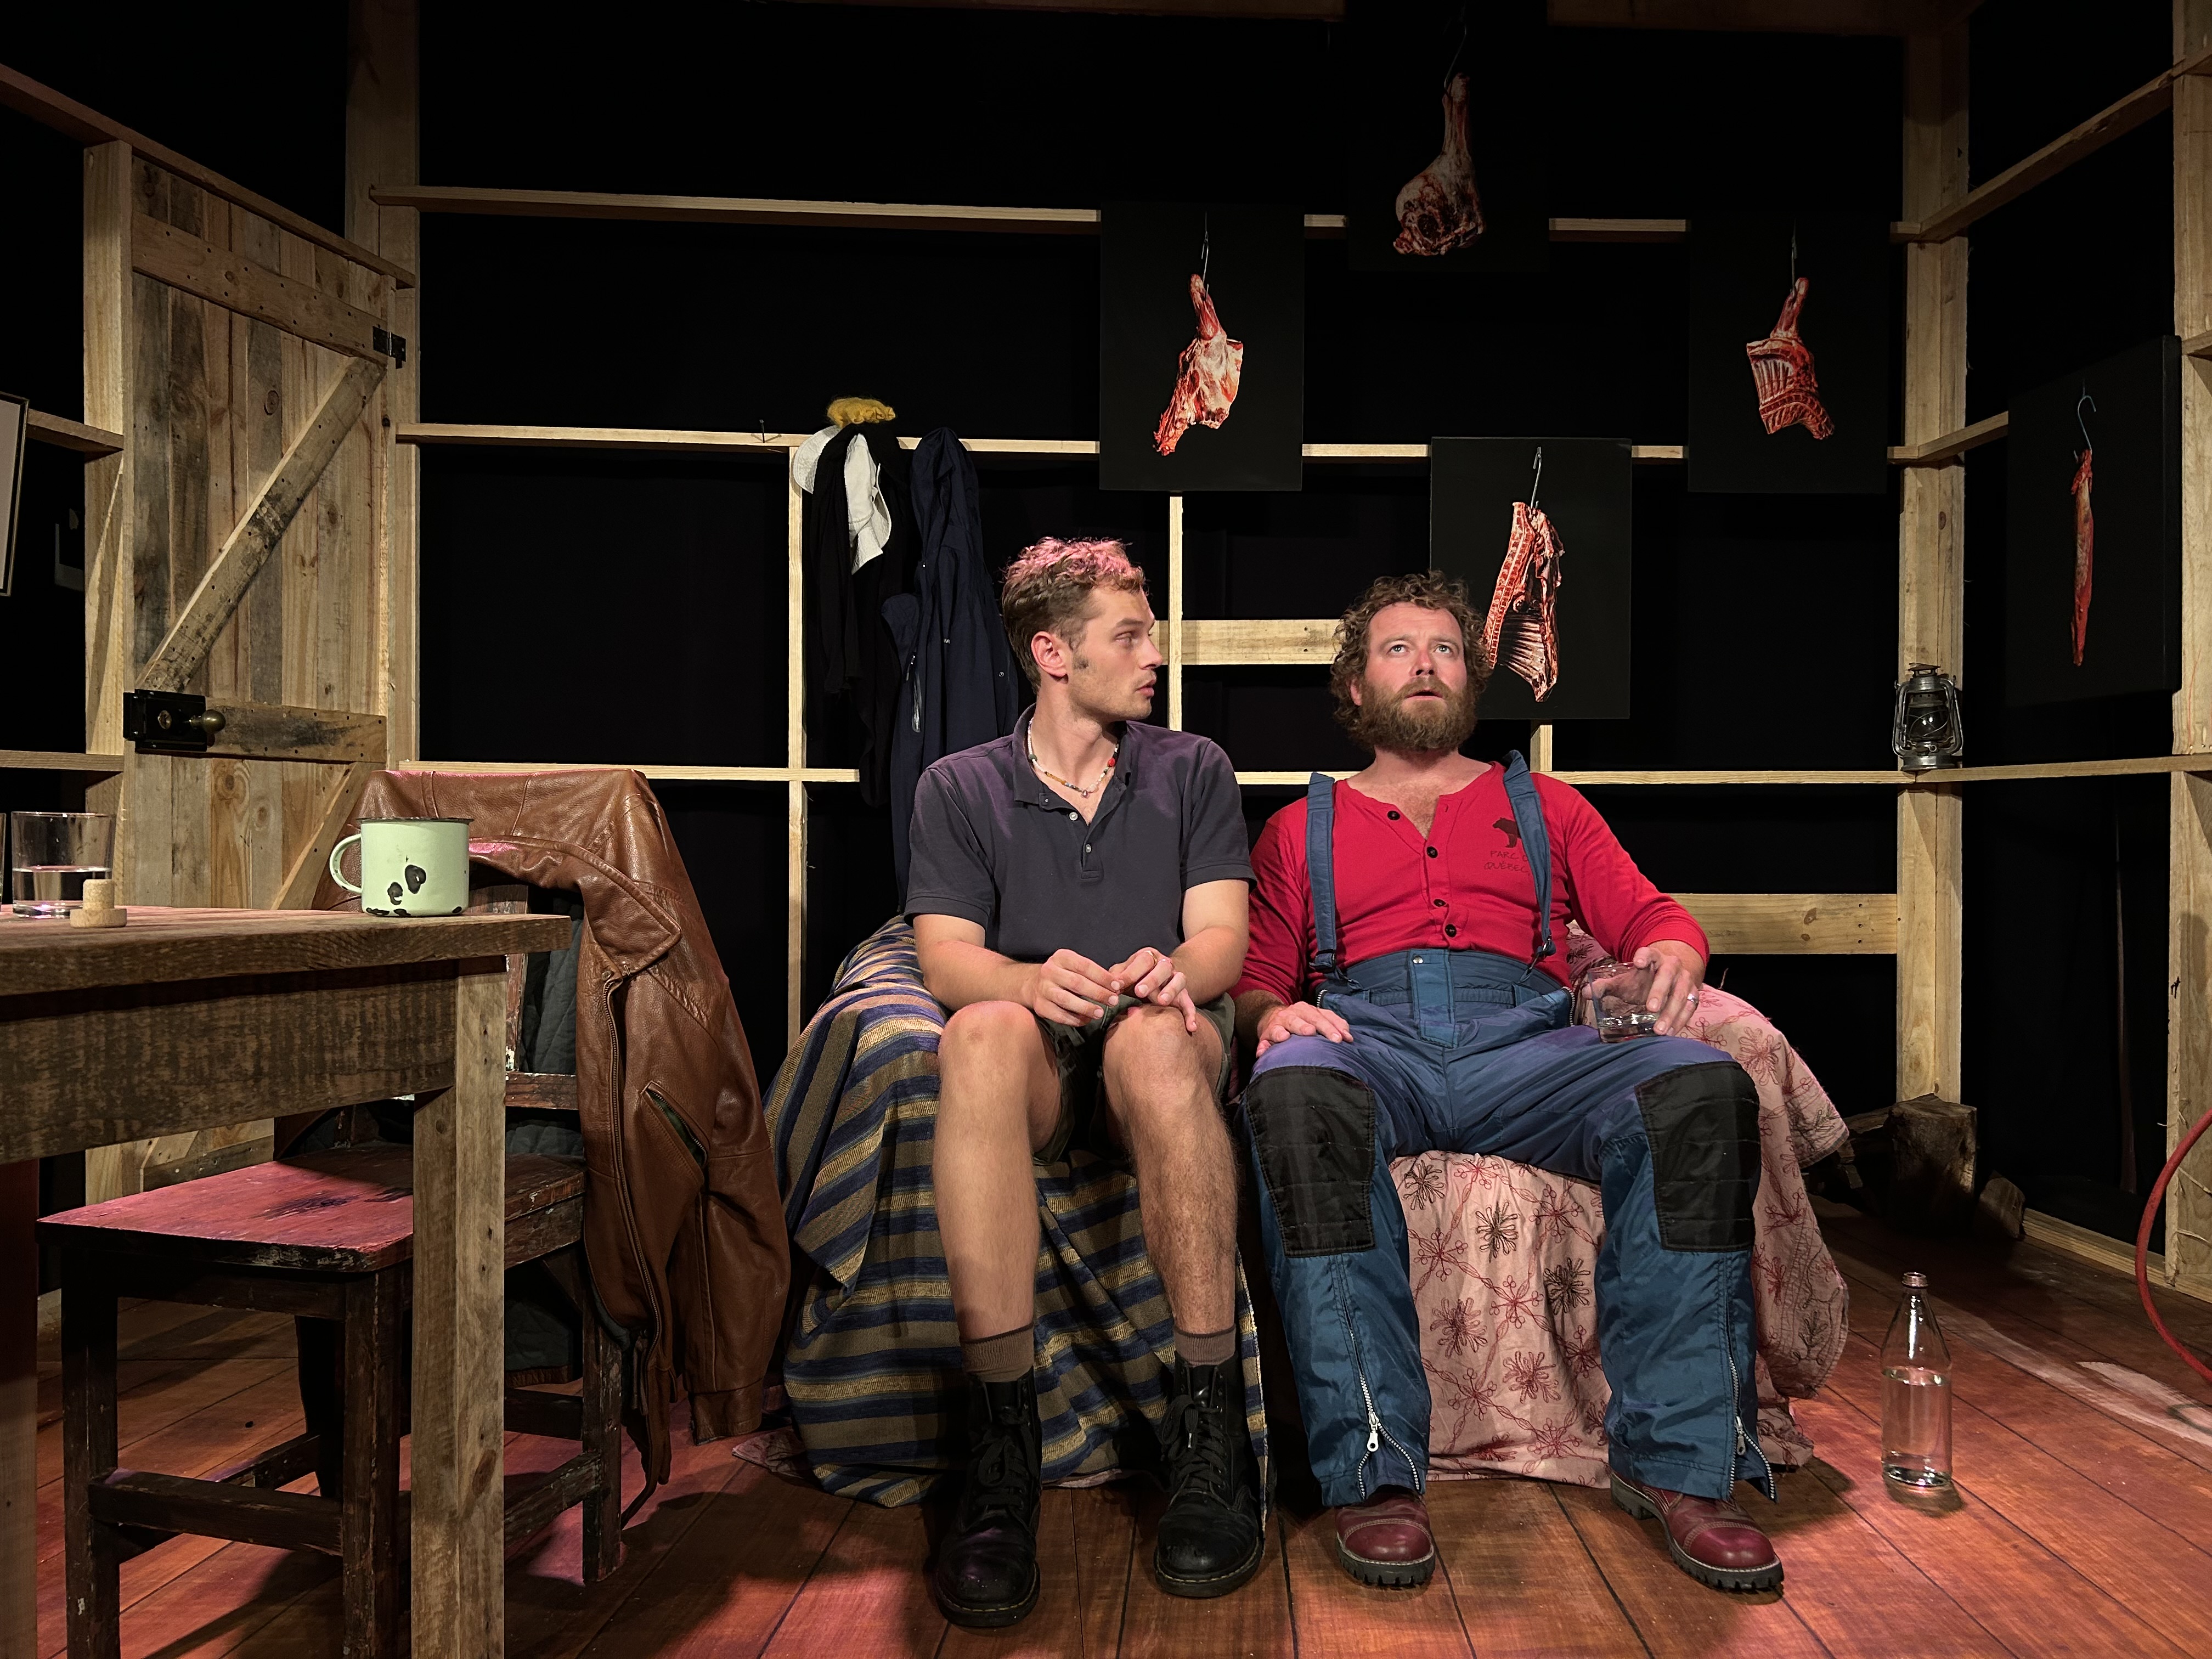 Brothers with a traumatic past - Aidan Scott (left) and Nicholas Pauling in 'The Rangers'. Image: Daniel Newton.